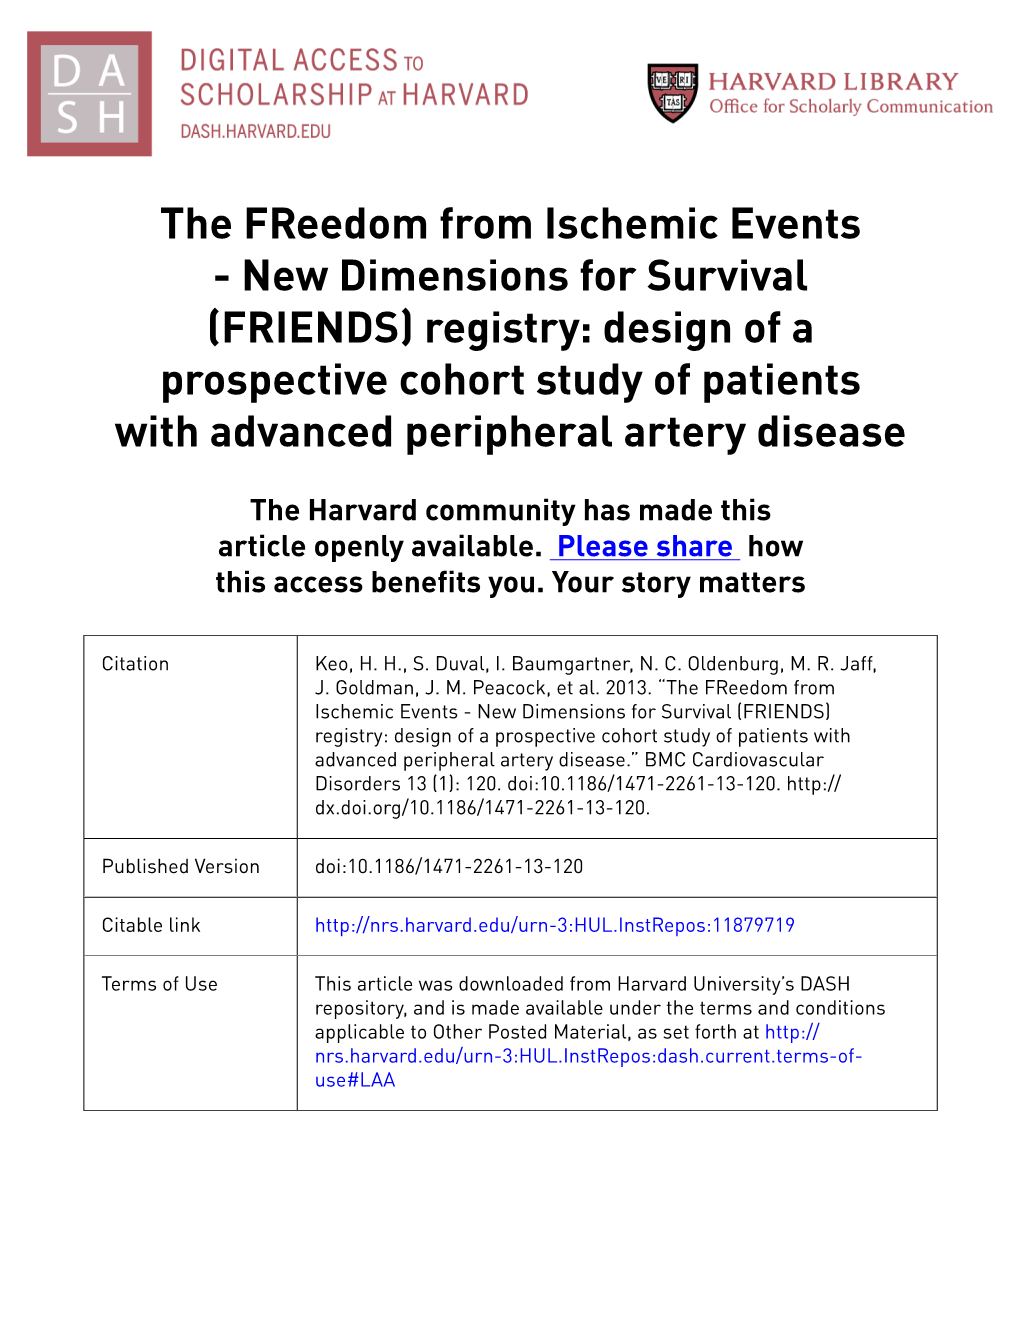 The Freedom from Ischemic Events